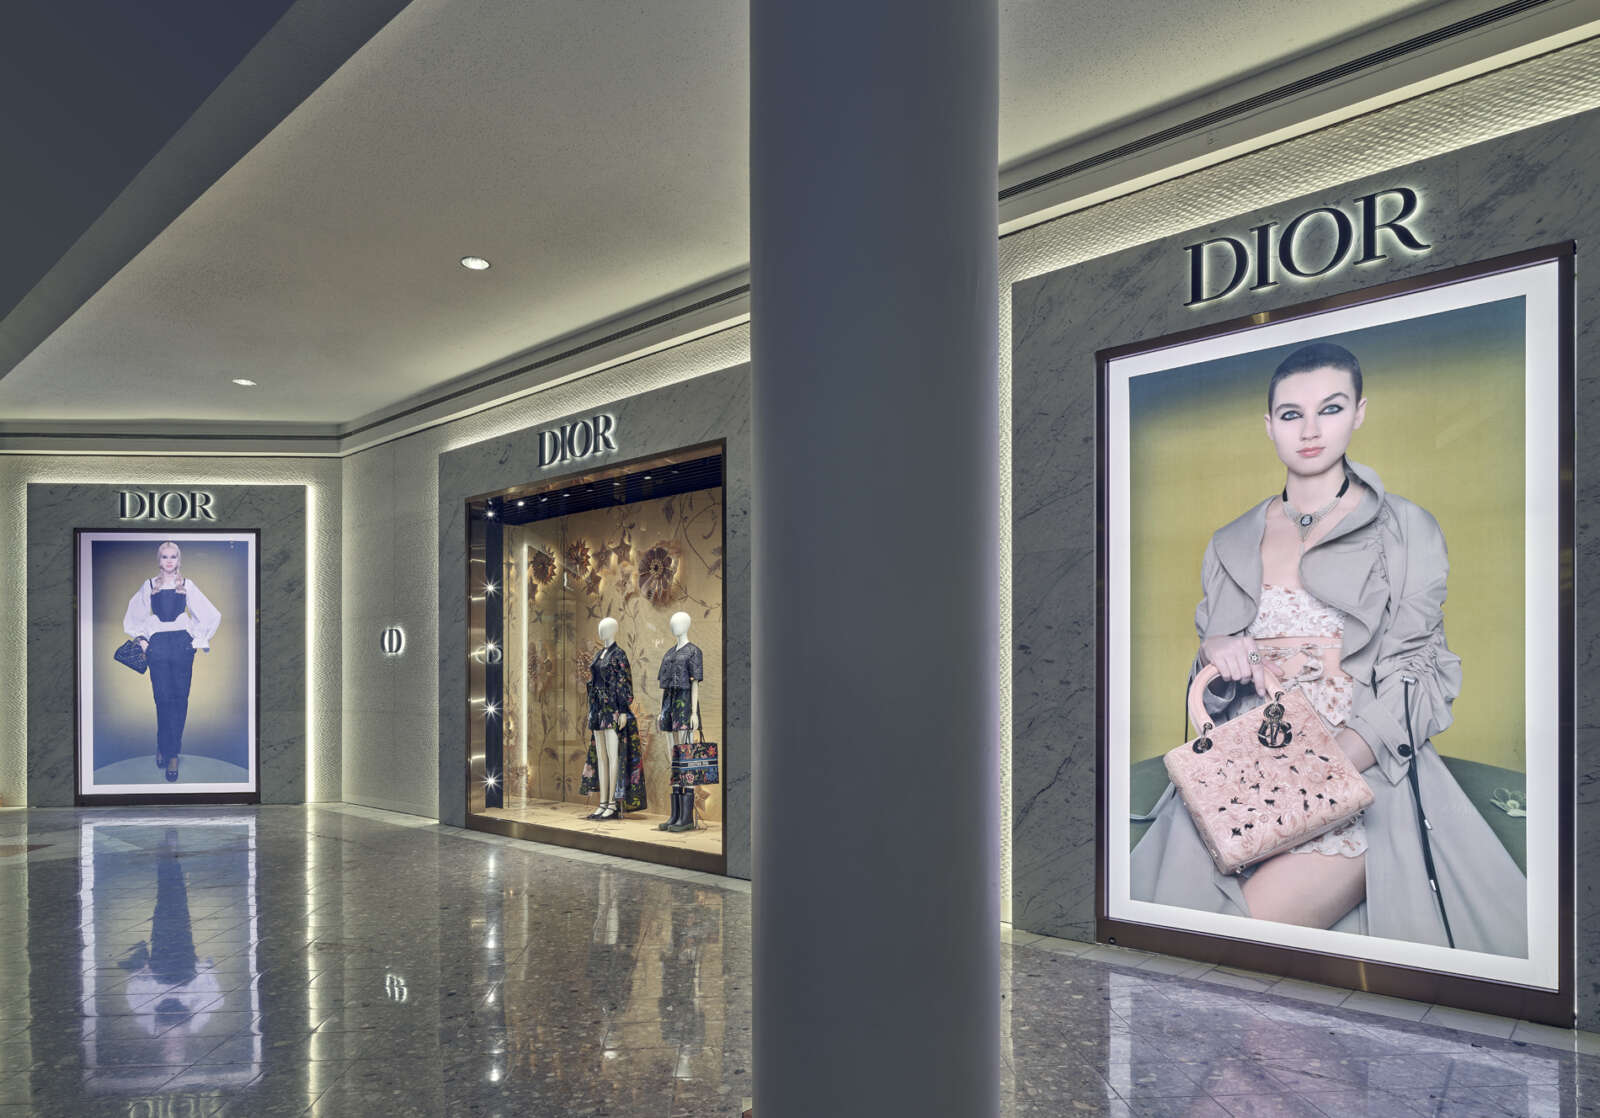 Dior's first Virginia store has opened in Tysons Galleria